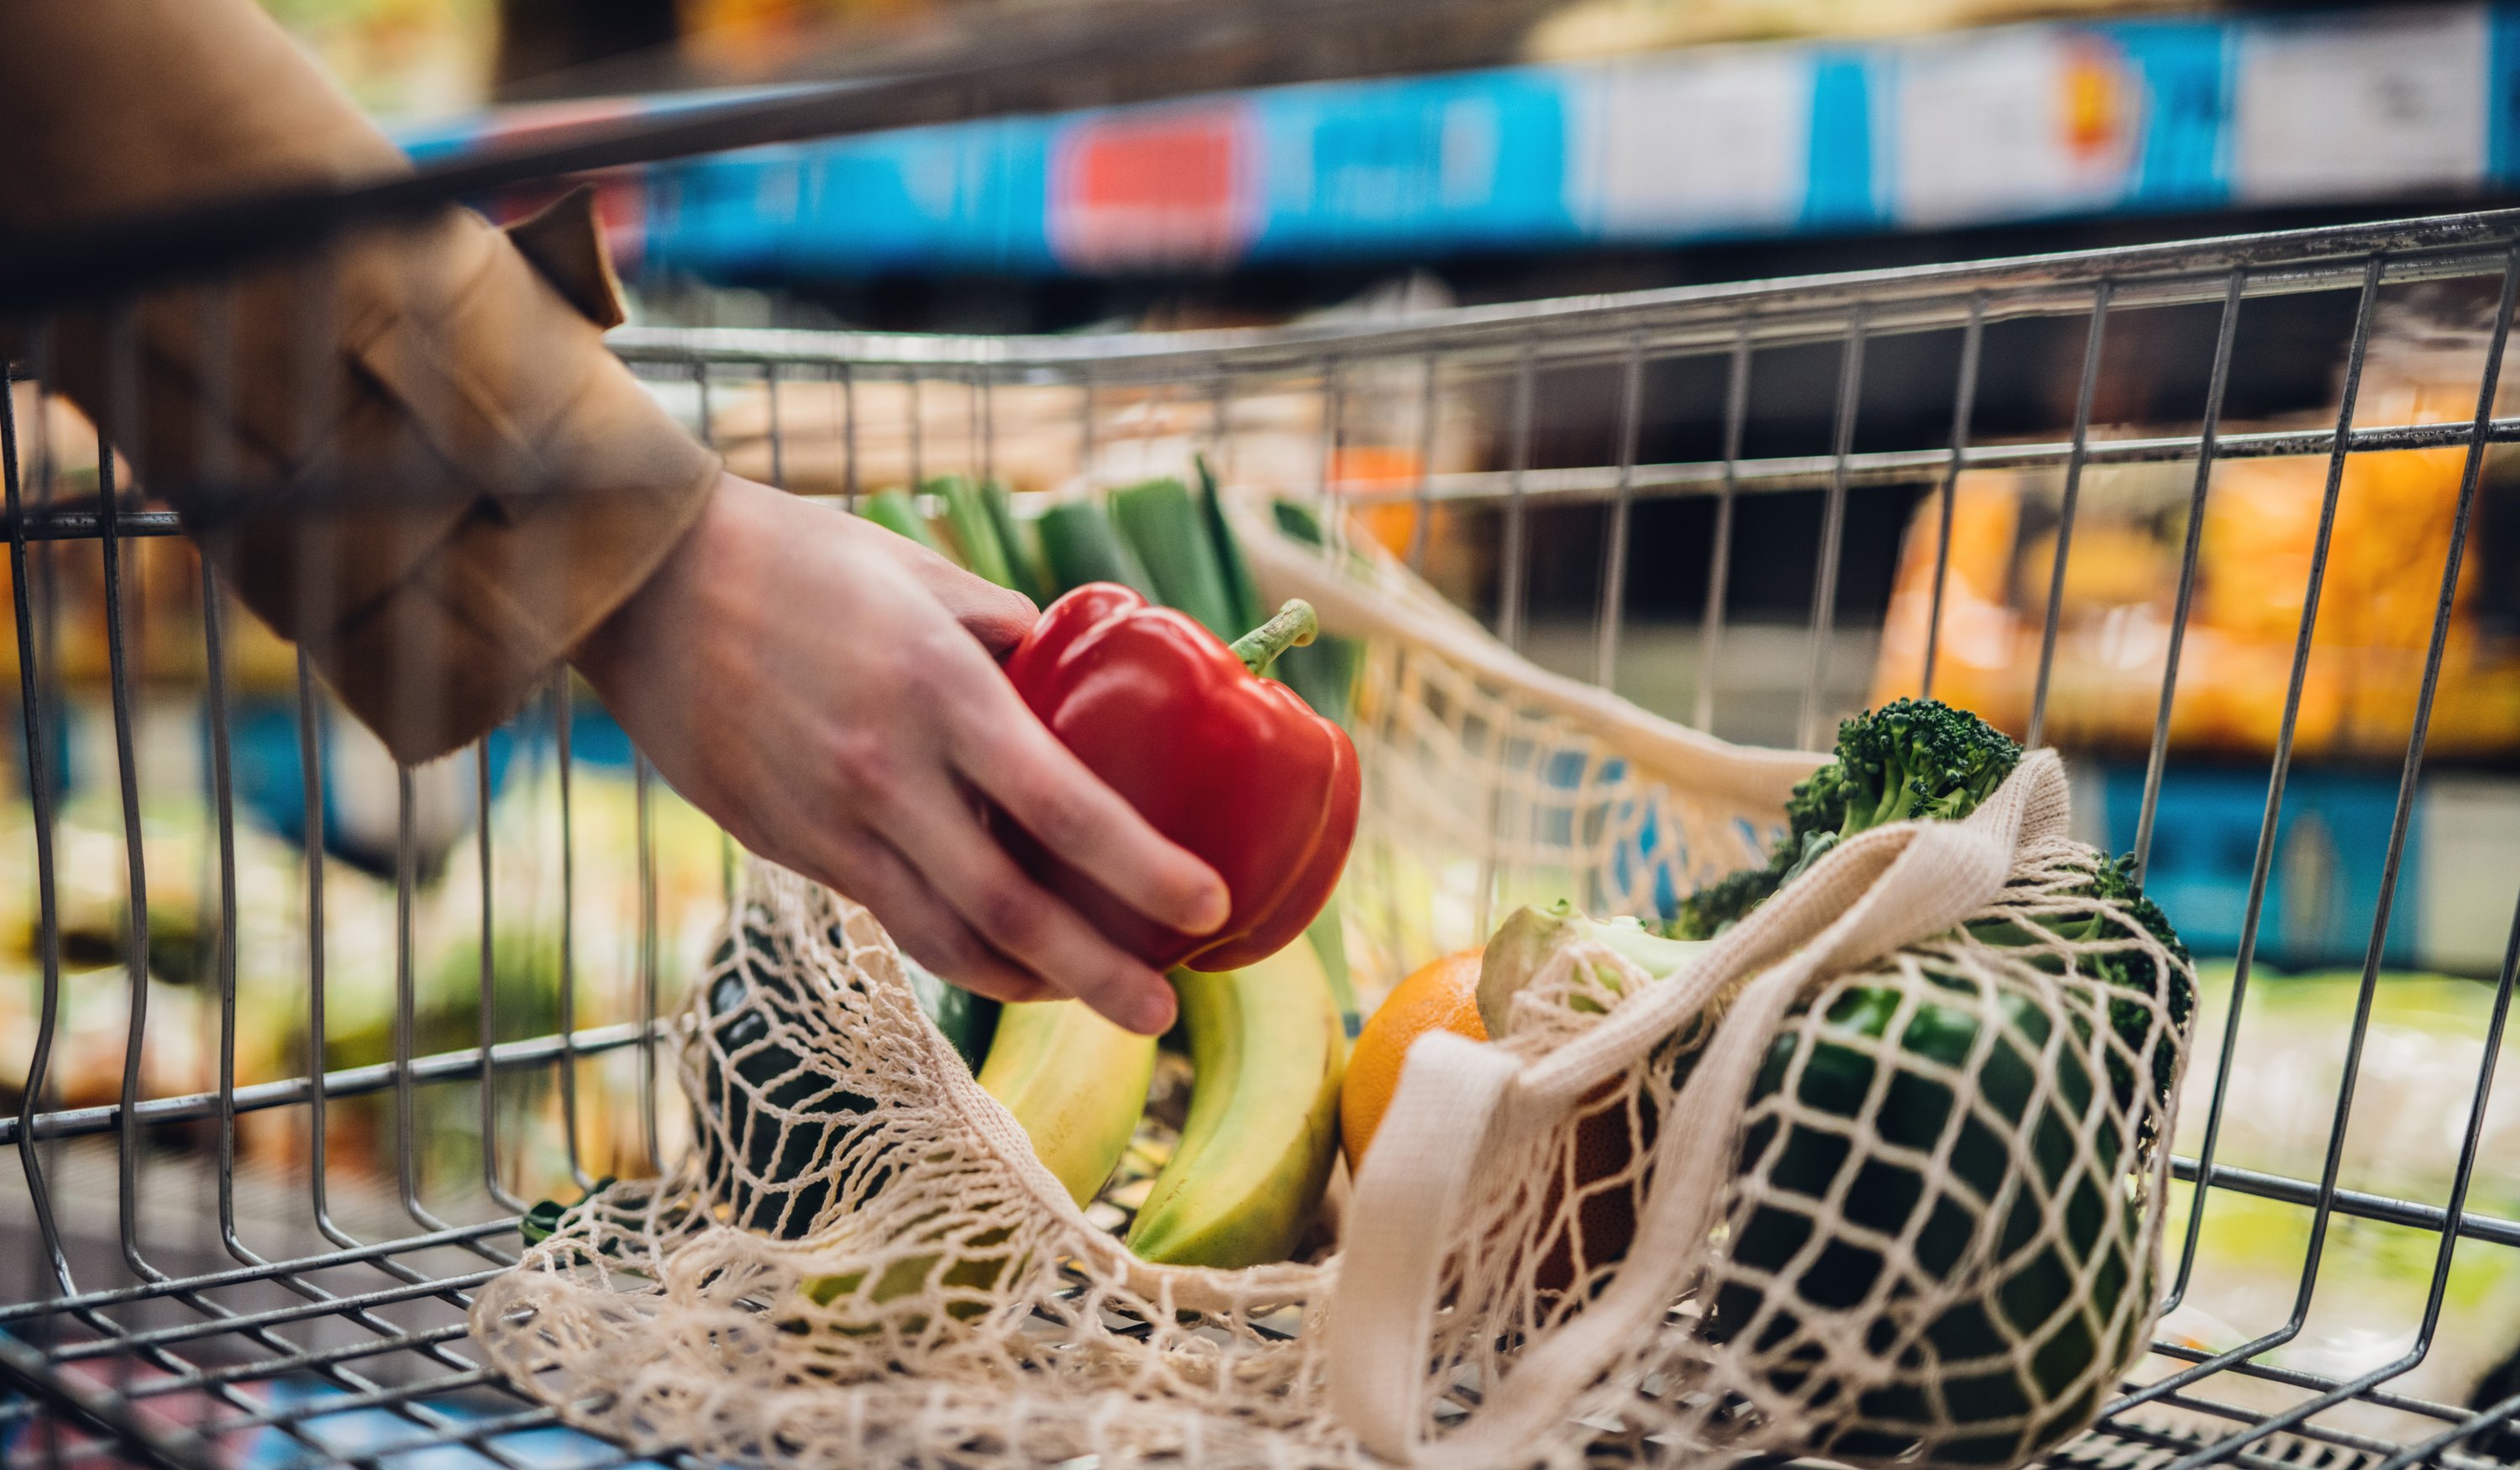 Grocery cart filled with produce. (Photo: Getty Images)